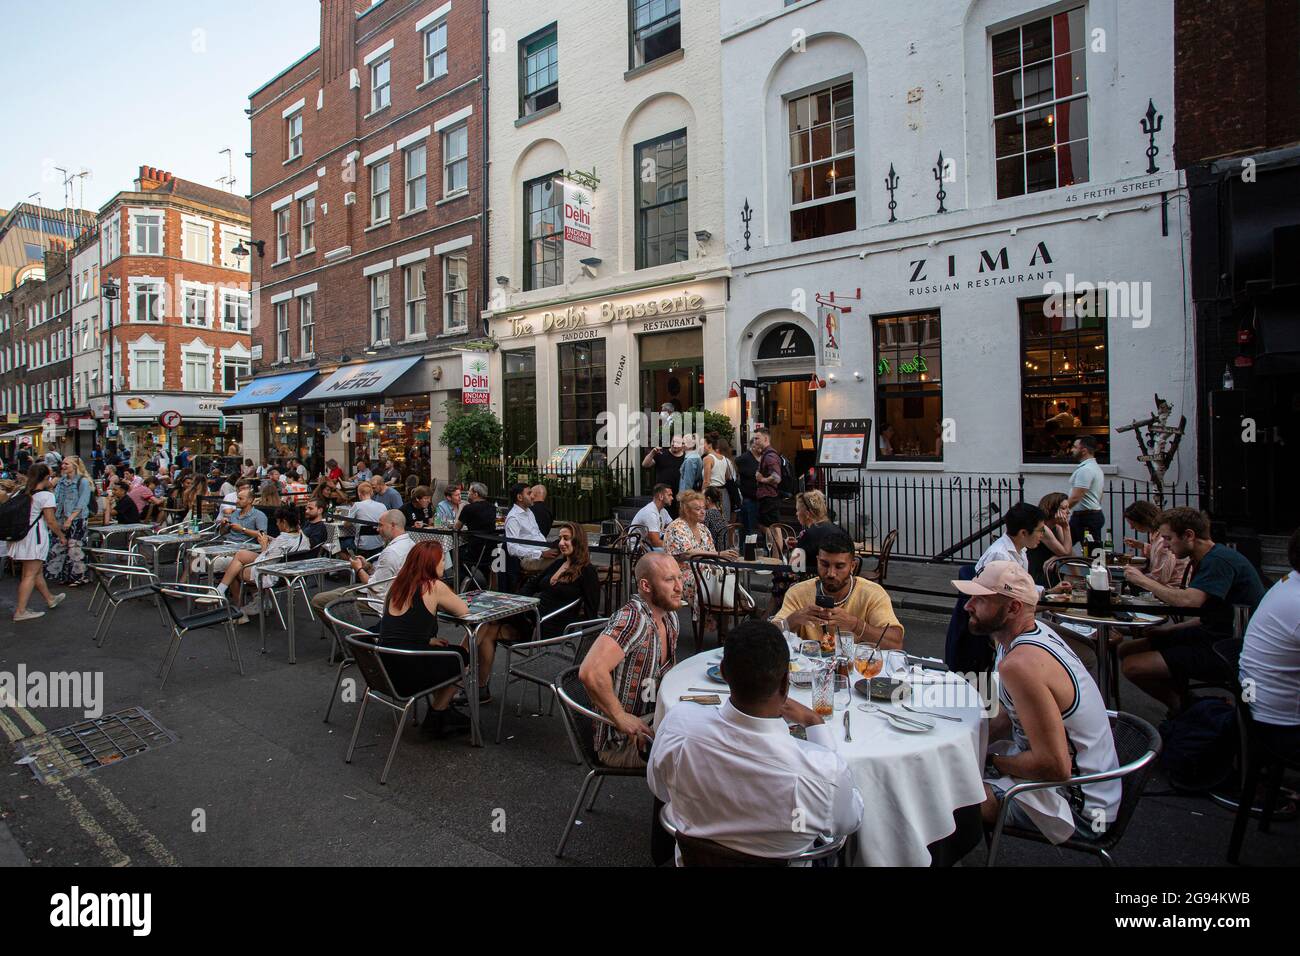 People drinking on tables placed outside on Frith Street in Soho, London, July 23rd 2021 Stock Photo